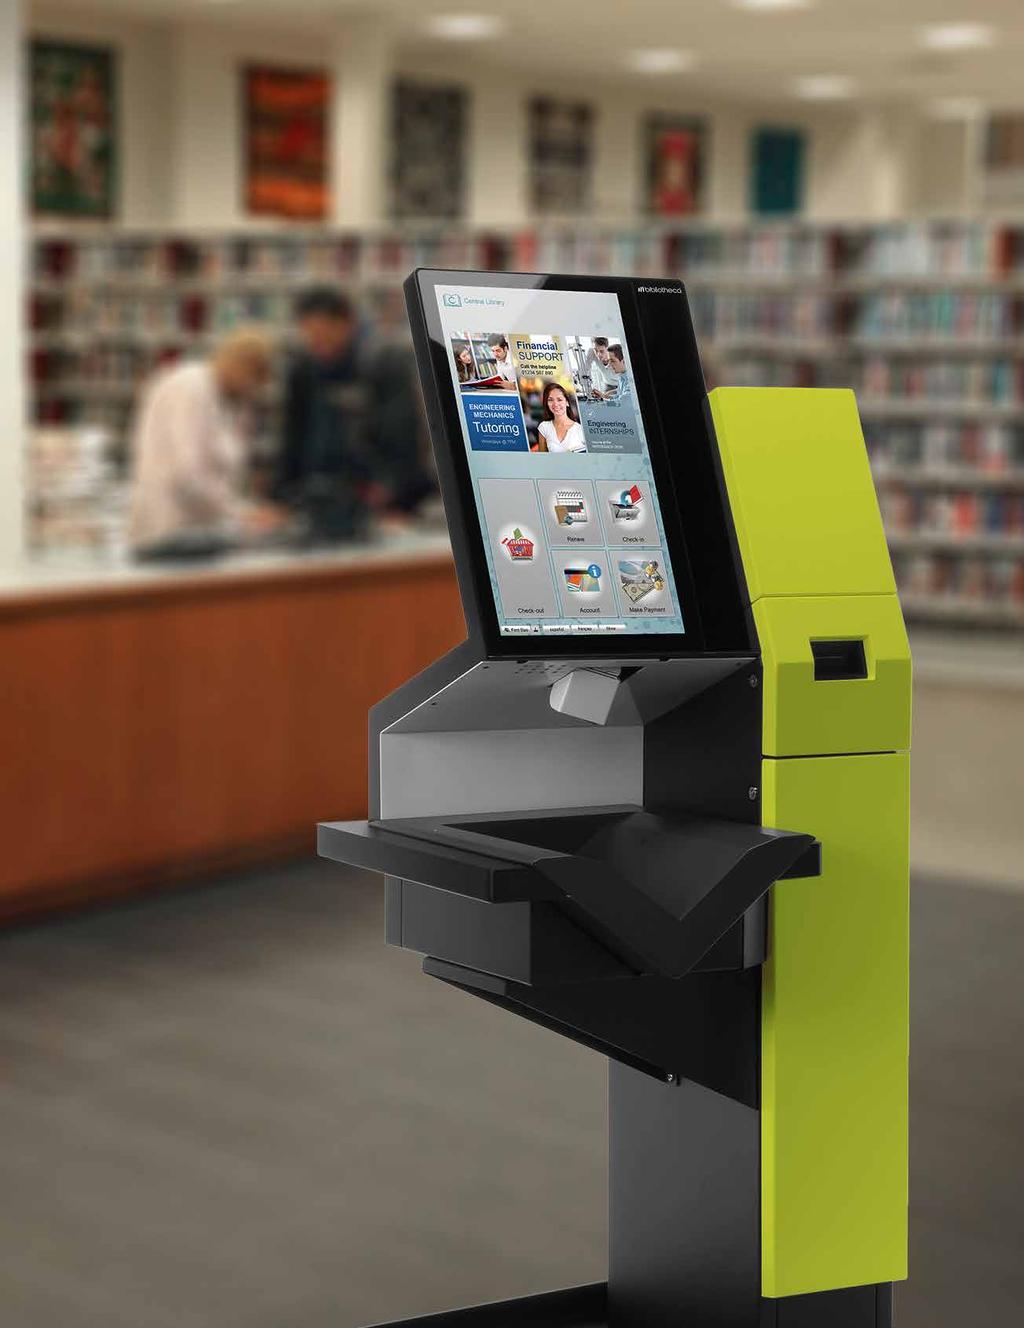 crafted with purpose We listened to the needs of our customers and crafted a self-service kiosk that would simplify the lives of both library staff and users.